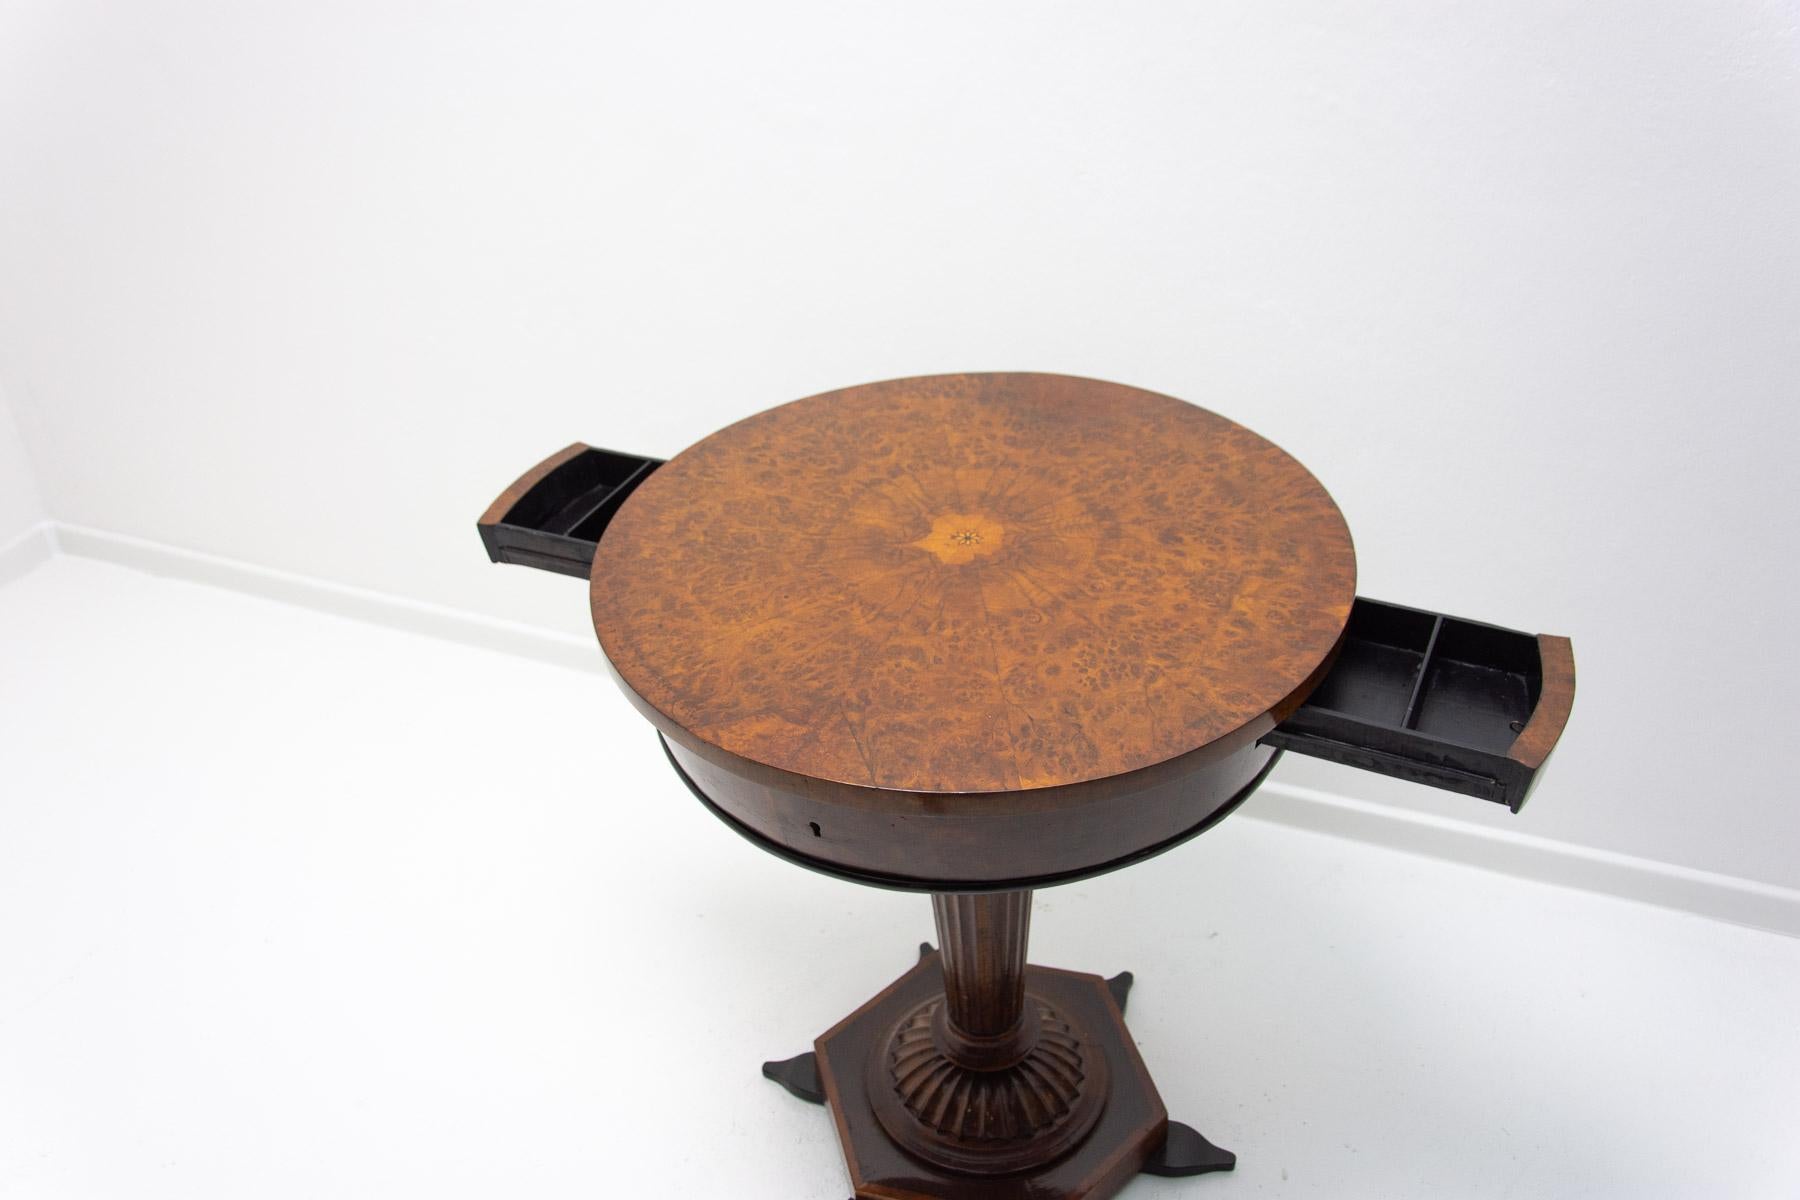 Completely Restored Neo-Baroque Card Table, Late 19th Century, Austria-Hungary For Sale 10